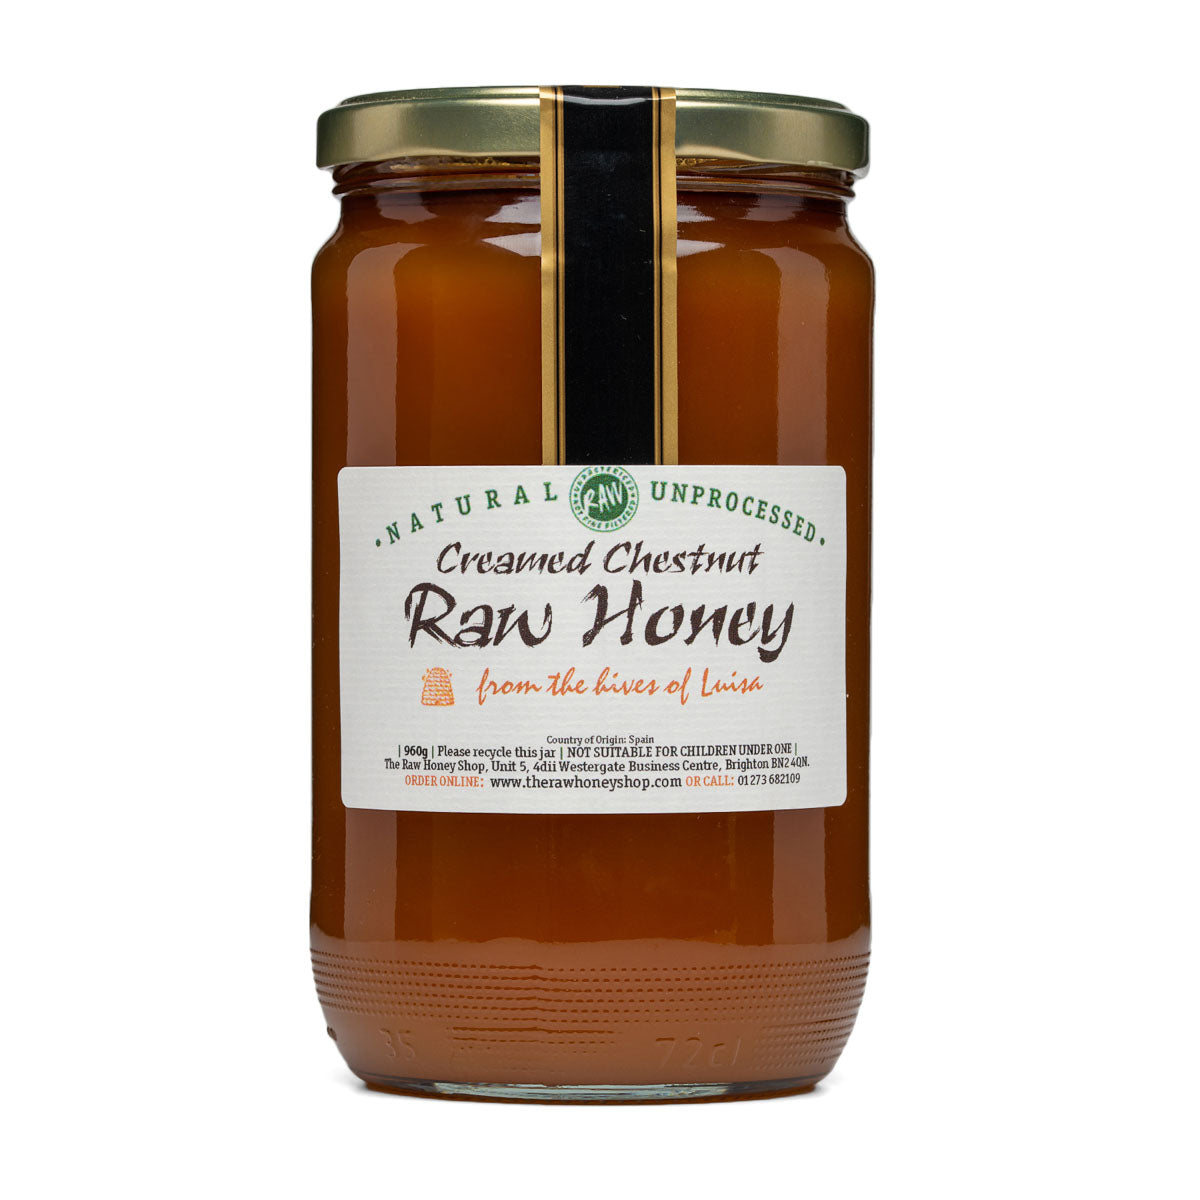 Creamed Chestnut Raw Honey | Magic of Spain | Raw Living UK | Raw Foods | Magic of Spain Creamed Chestnut Honey (960g) is an unpasteurised, enzyme-rich pure and natural honey. It has a smokey, earthy and full-bodied flavour.